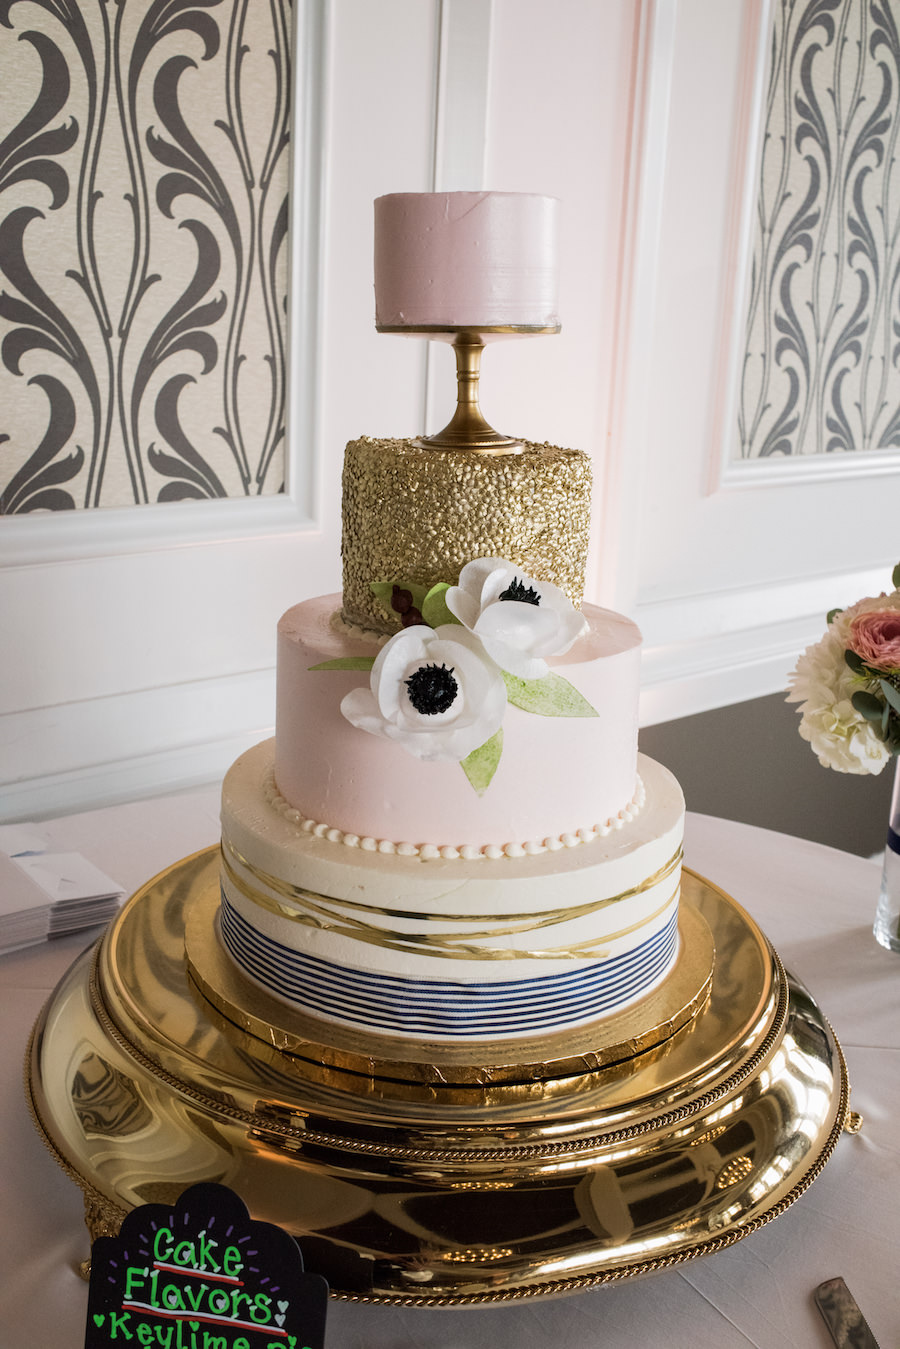 Four Tiered Gold and Navy Wedding Cake from Tampa Bay Bakery A Piece of Cake with Stripes, Glitter and Mini Cake Tray Topper and Anemones on Gold Platter